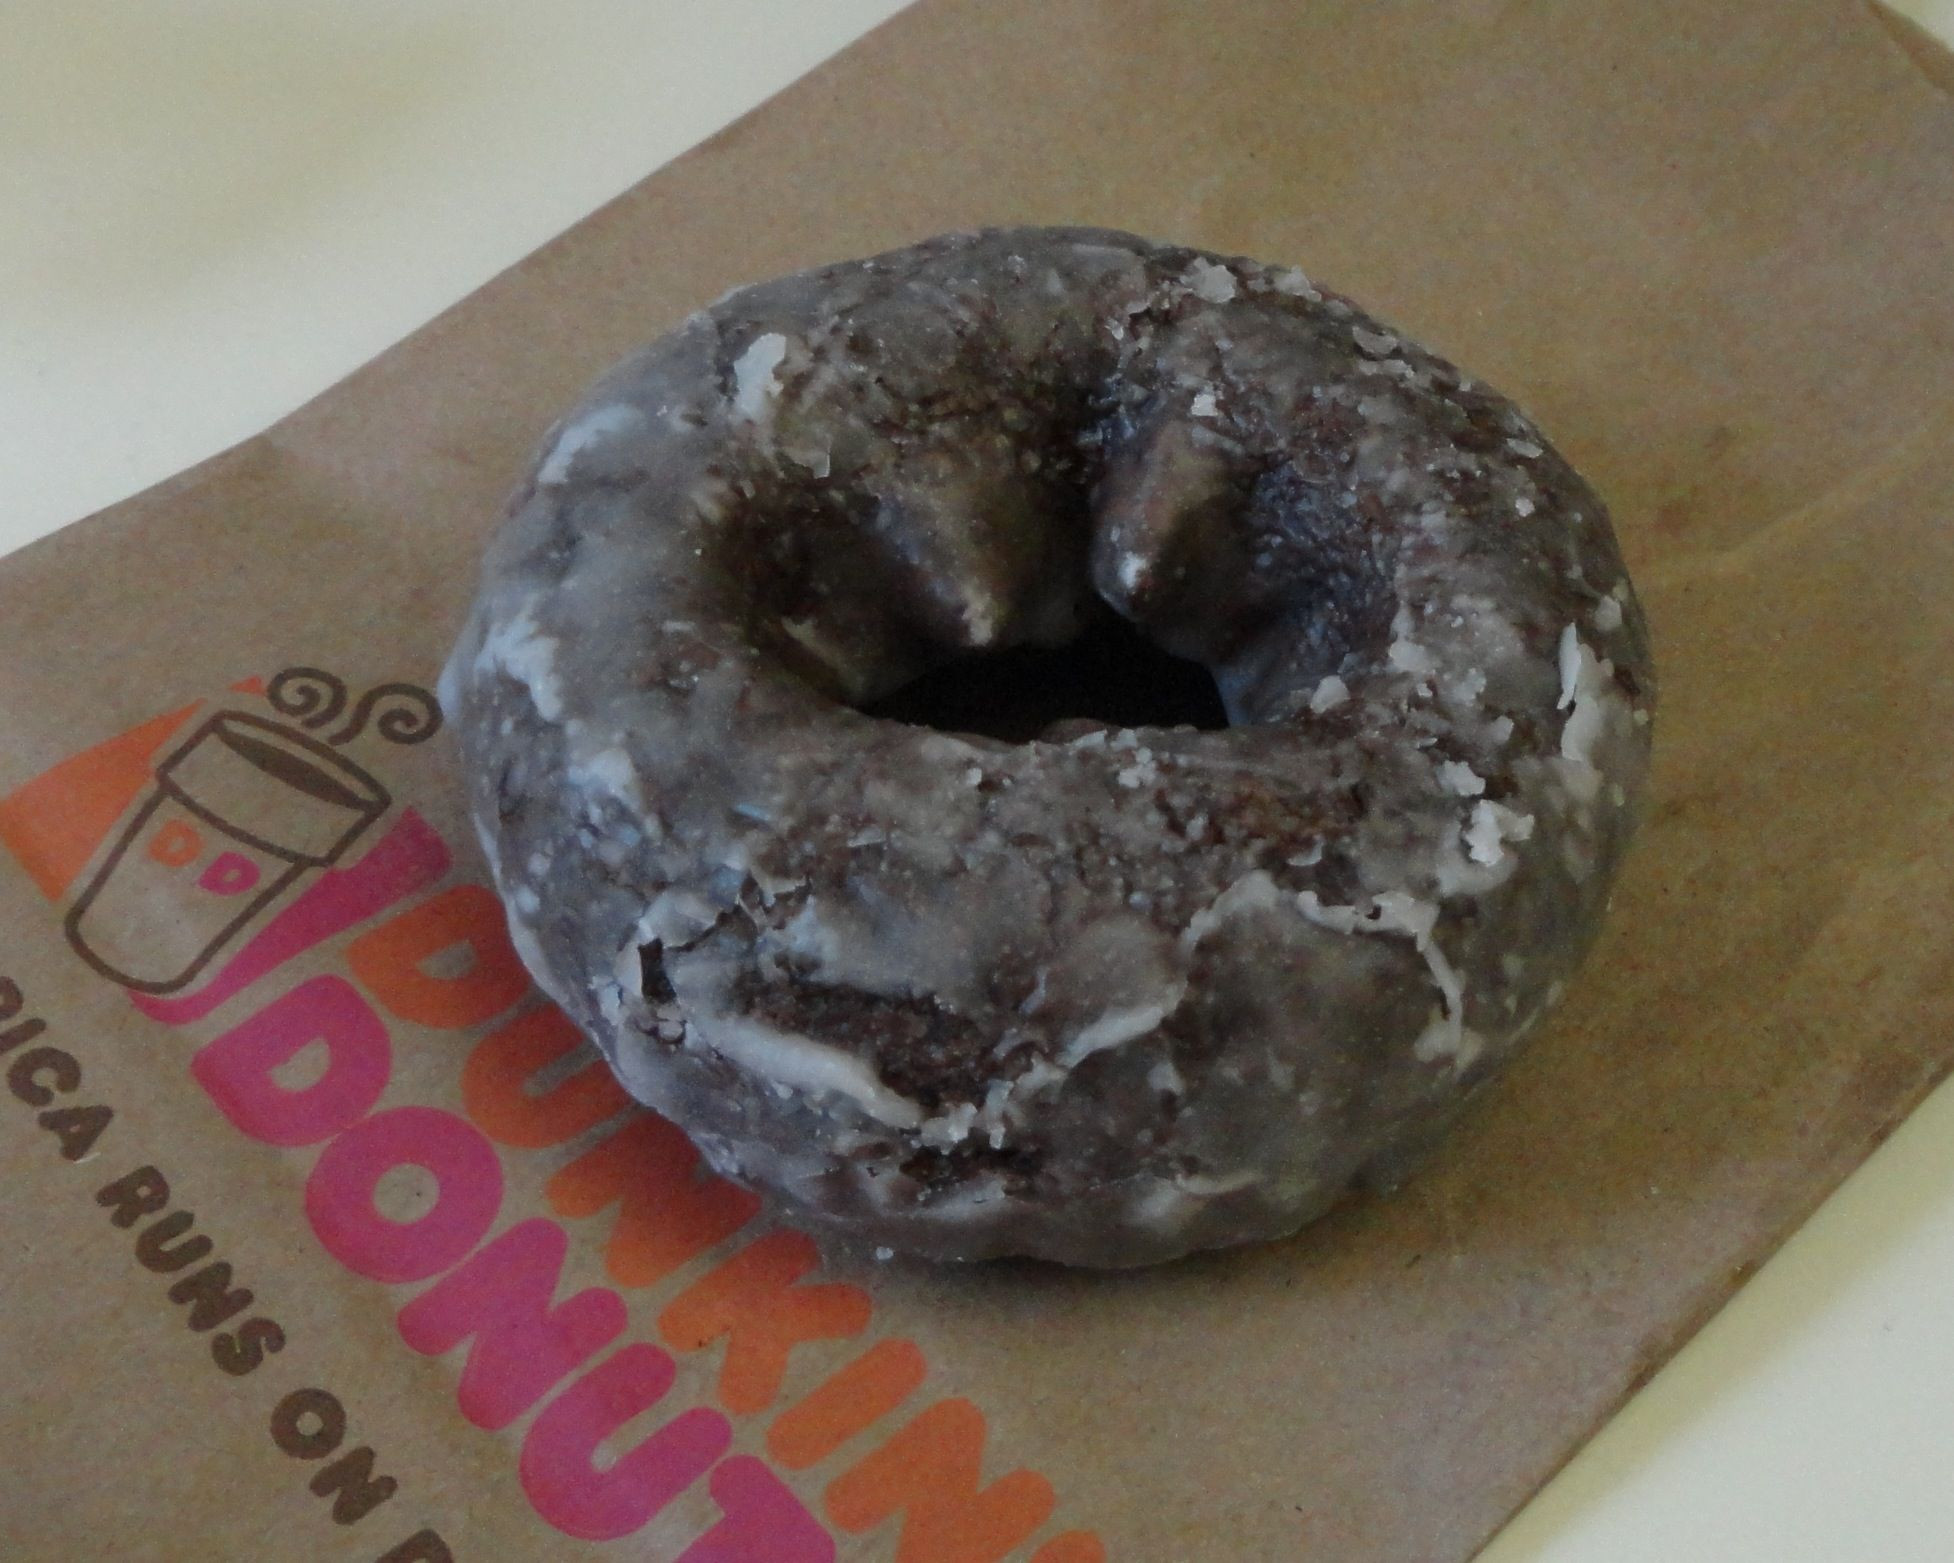 Dunkin Donuts Chocolate Cake Donut
 Dunkin Donuts fans I need your advice